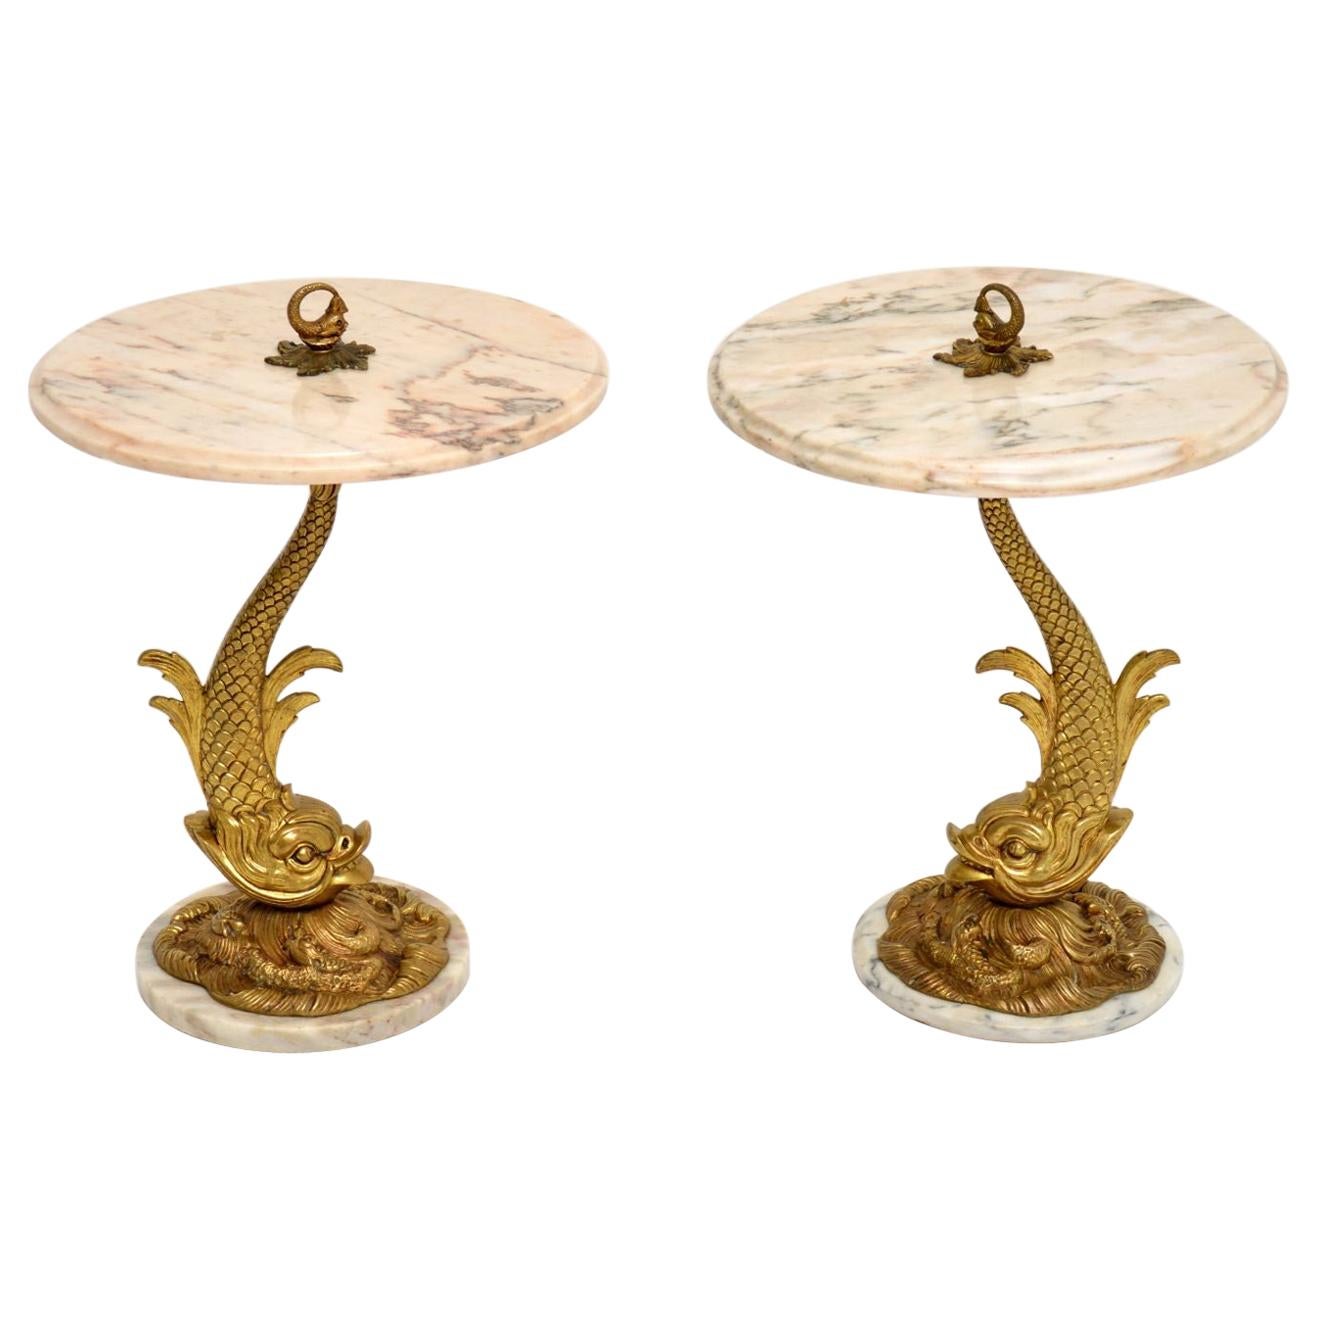 Pair of Antique Marble and Brass Side Tables